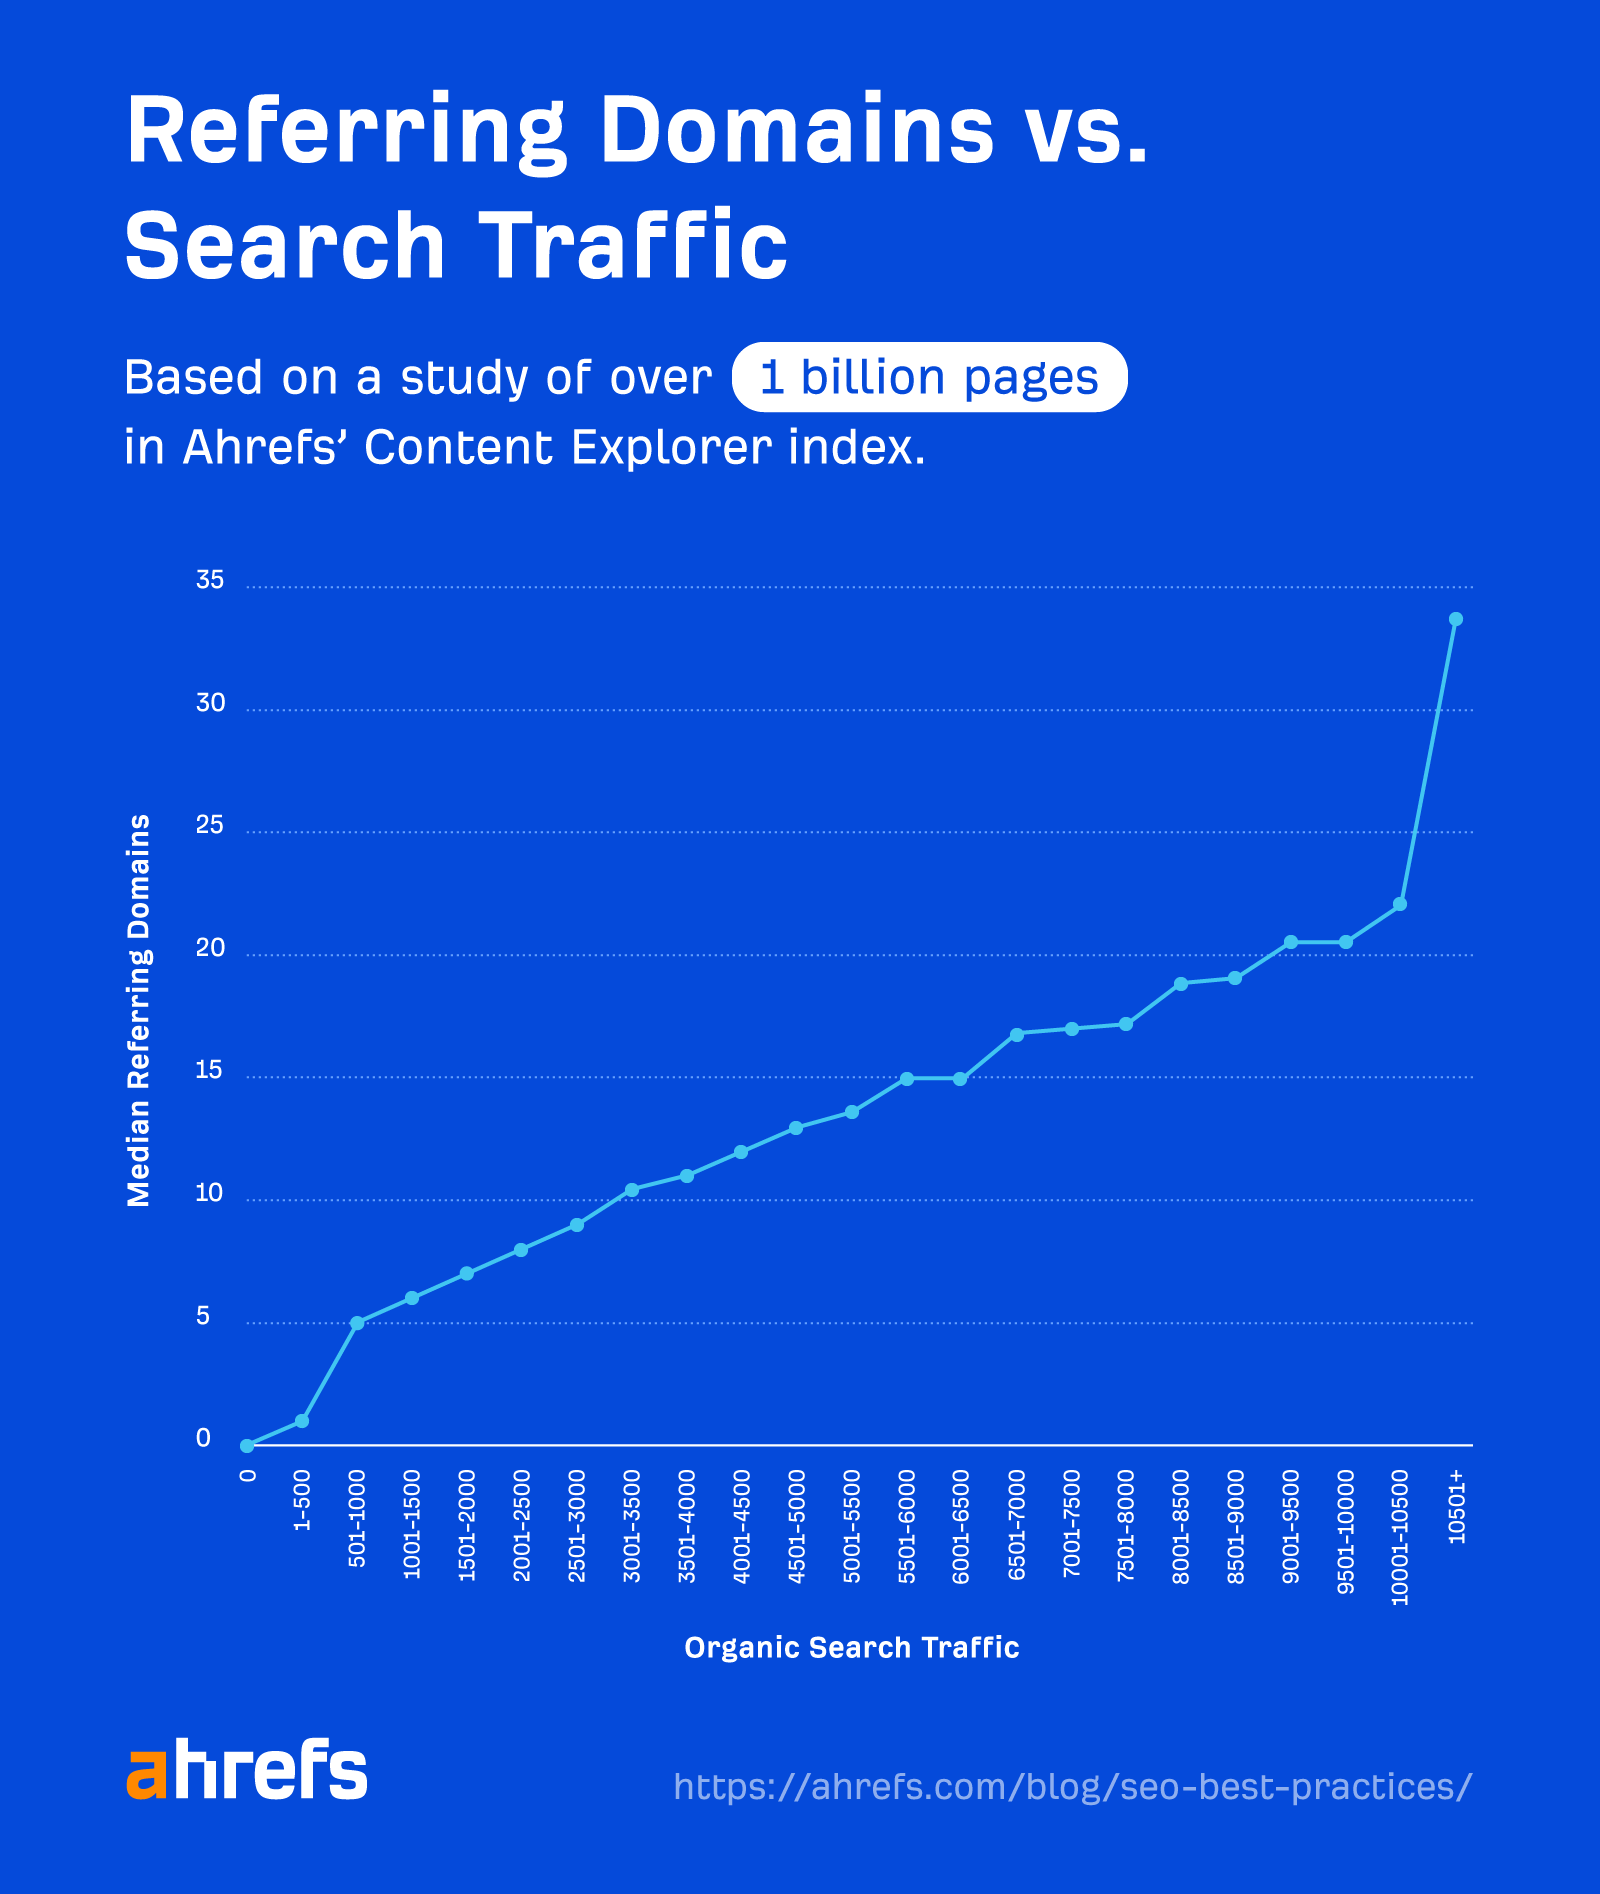 Line graph showing referring domains vs. search traffic
